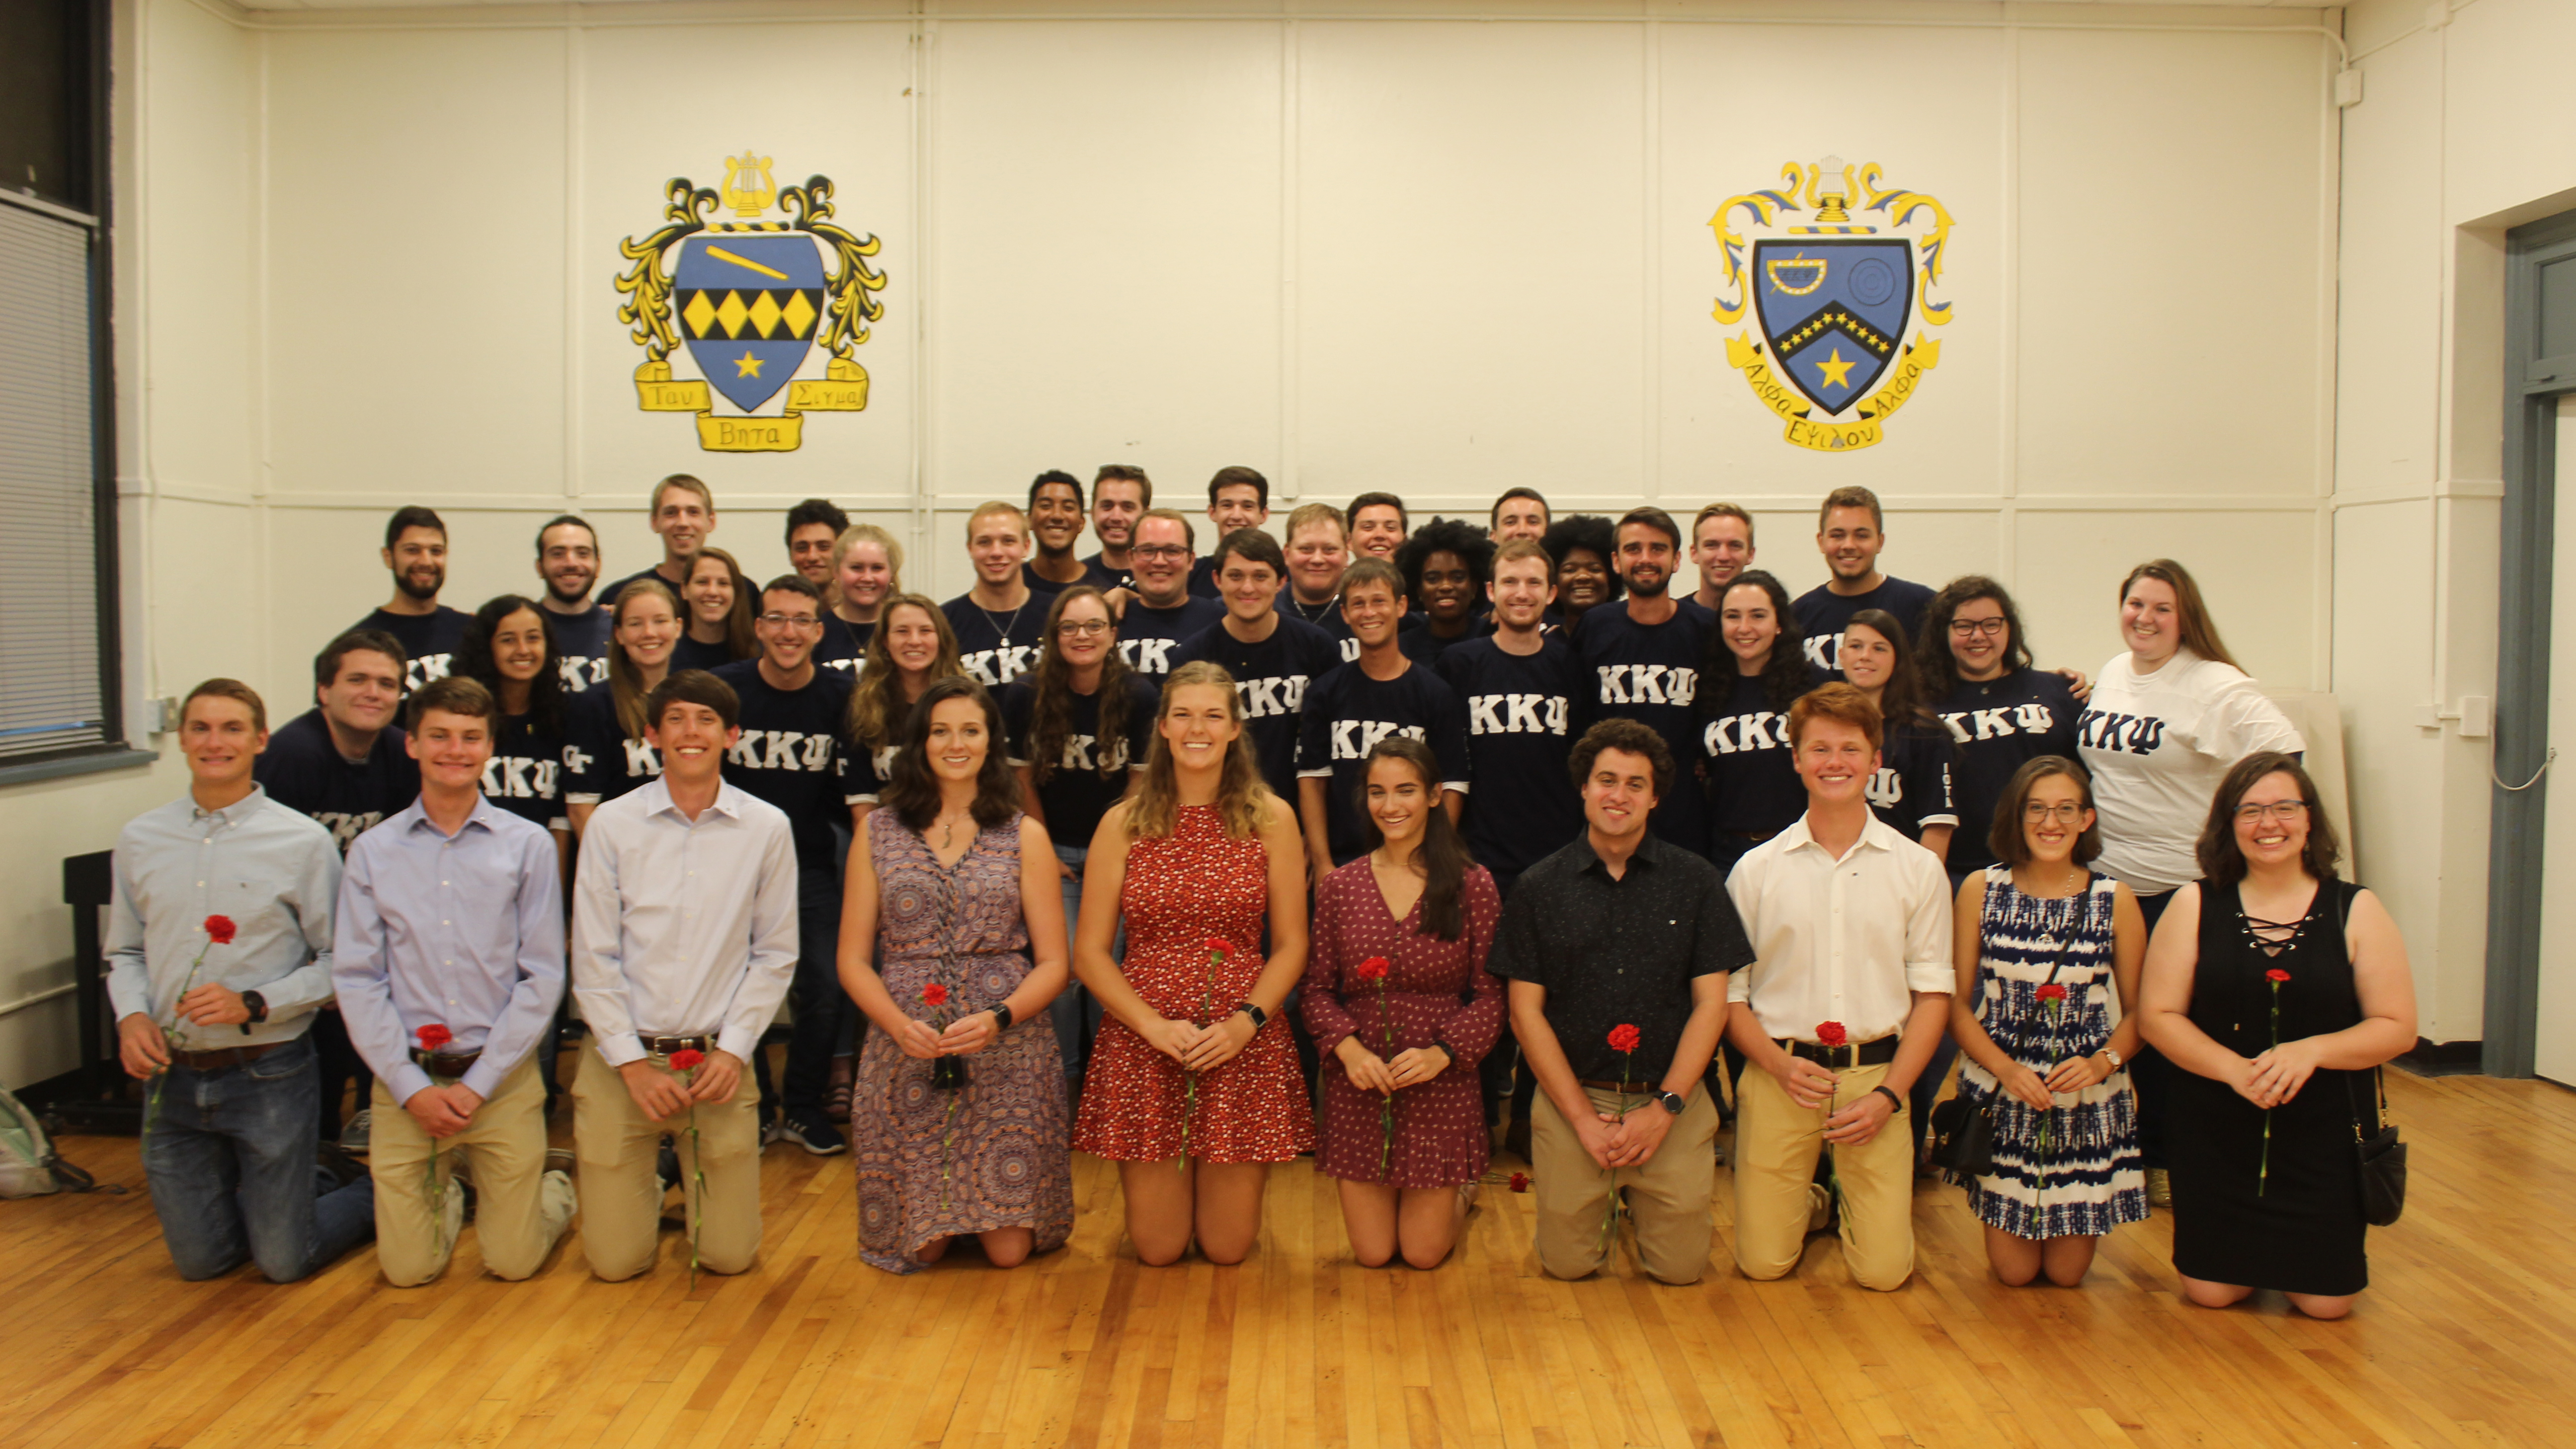 KKPsi students in a group posing for a photo.